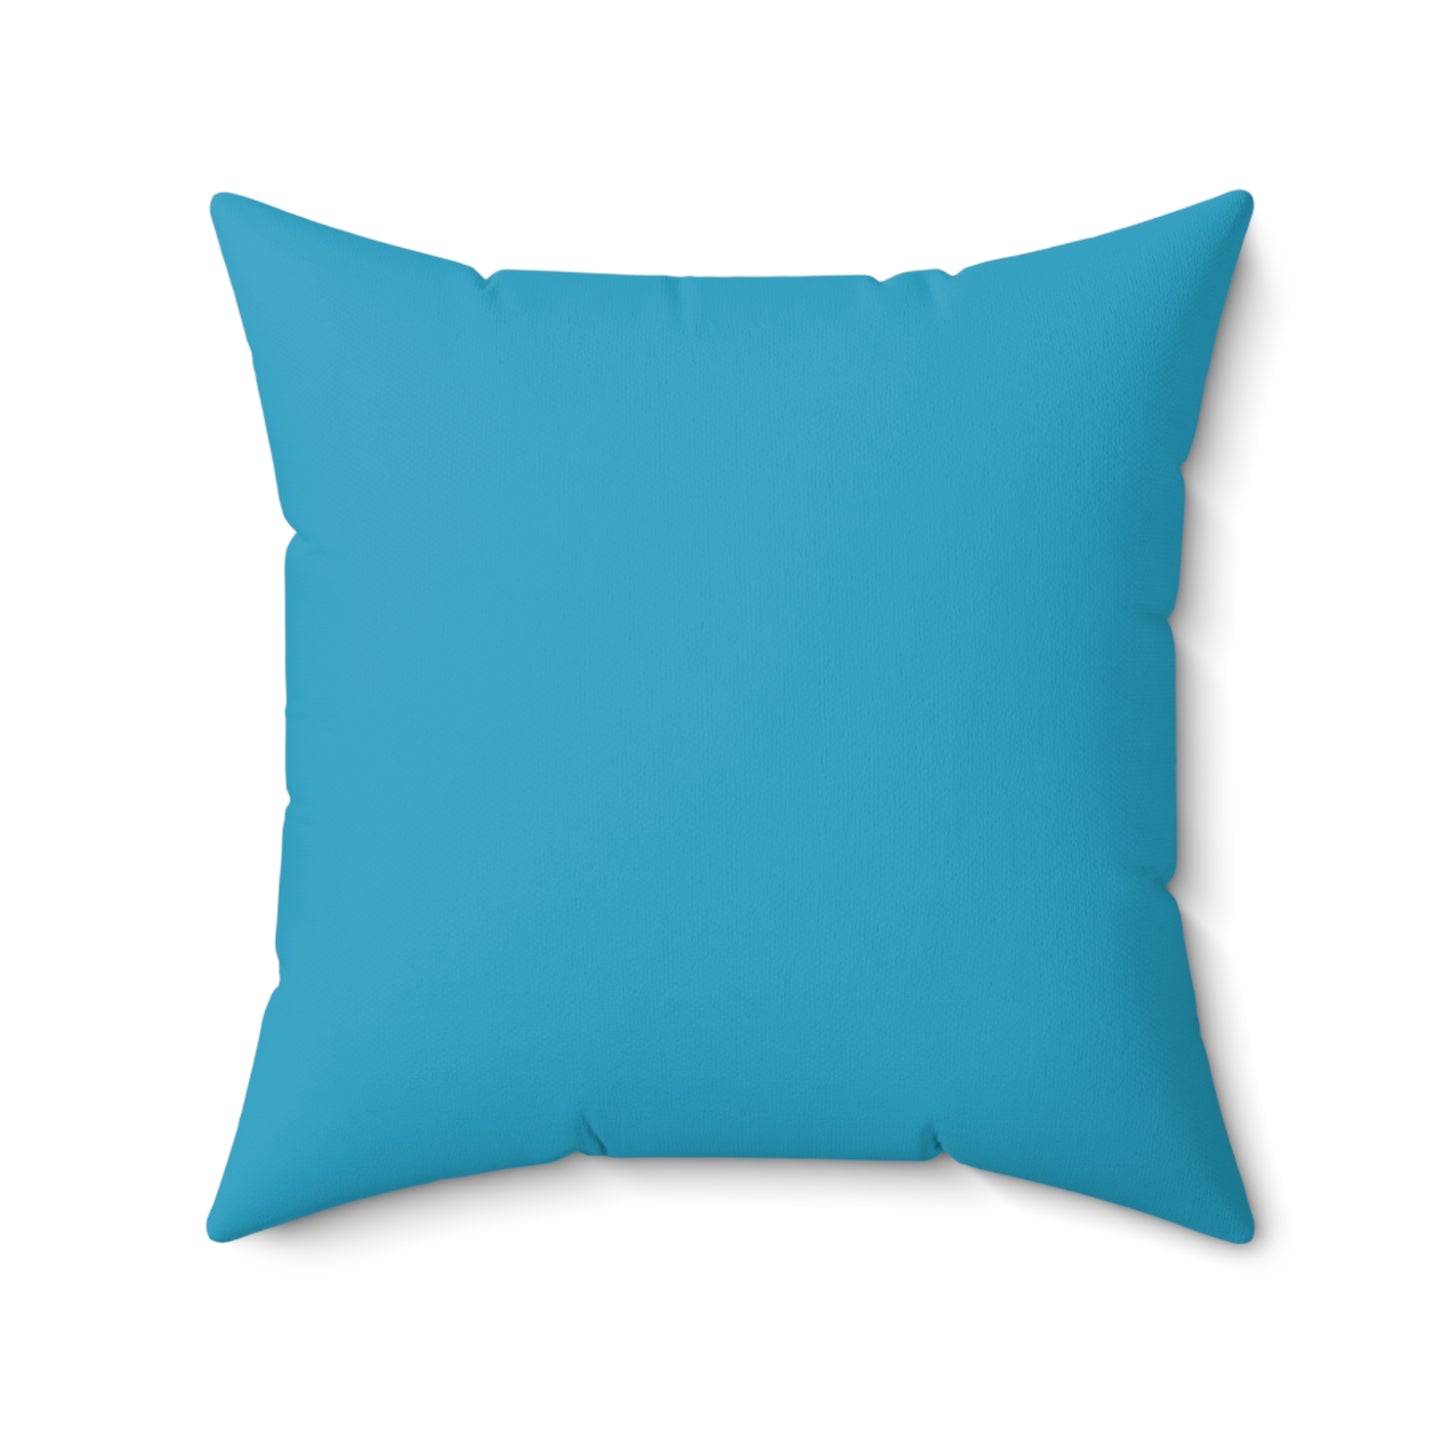 "What If?" Square Pillow